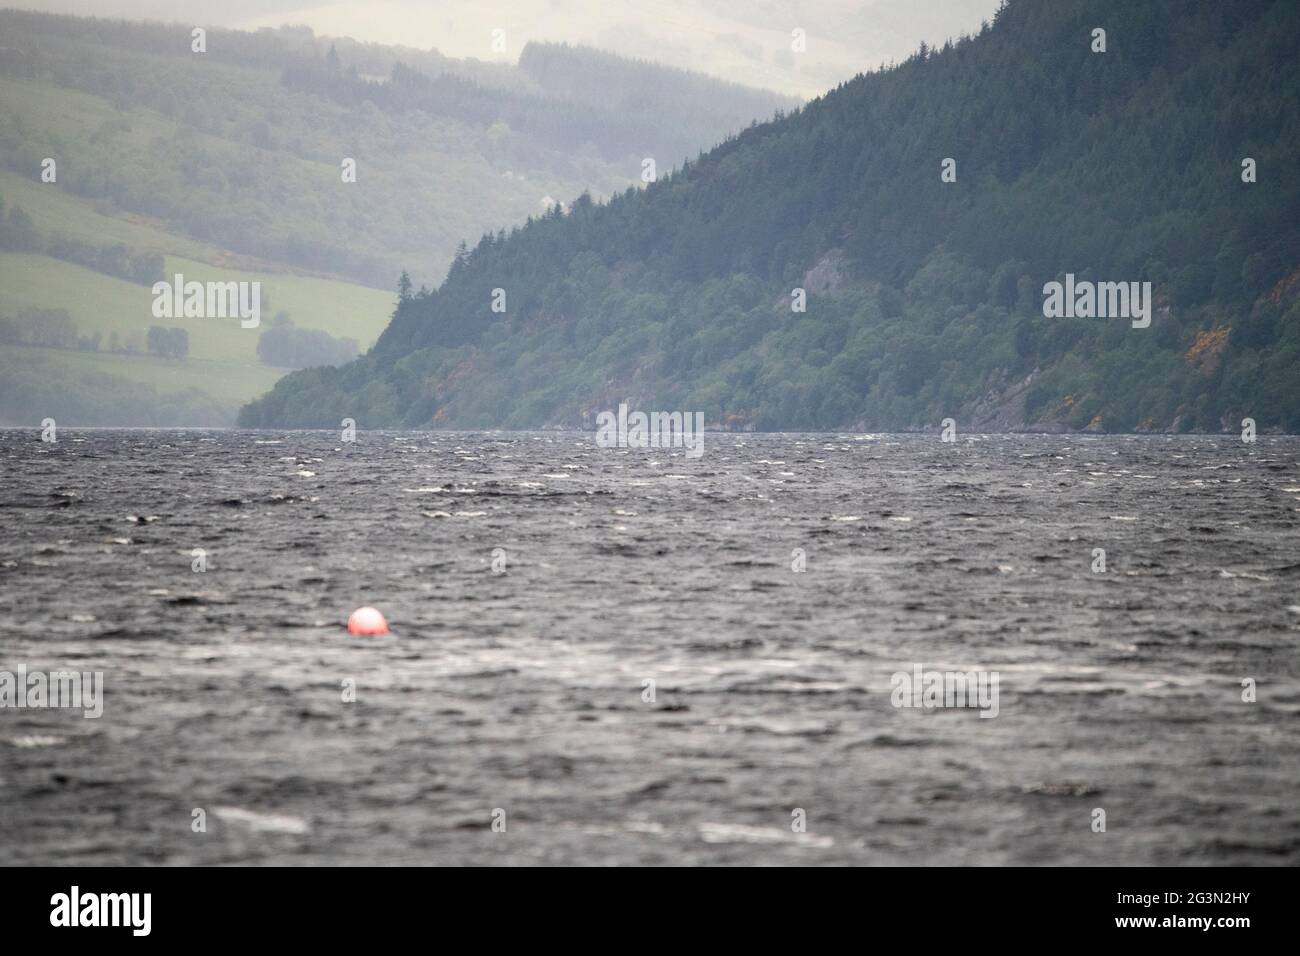 Dores, Loch Ness, Scotland, UK. 13 June 2021. Pictured: View looking Loch Ness along the Great Glen towards Urquhart Castle. Loch Ness is famous for the Loch Ness Monster AKA Nessie.  Credit: Colin Fisher/CDFIMAGES.COM Stock Photo